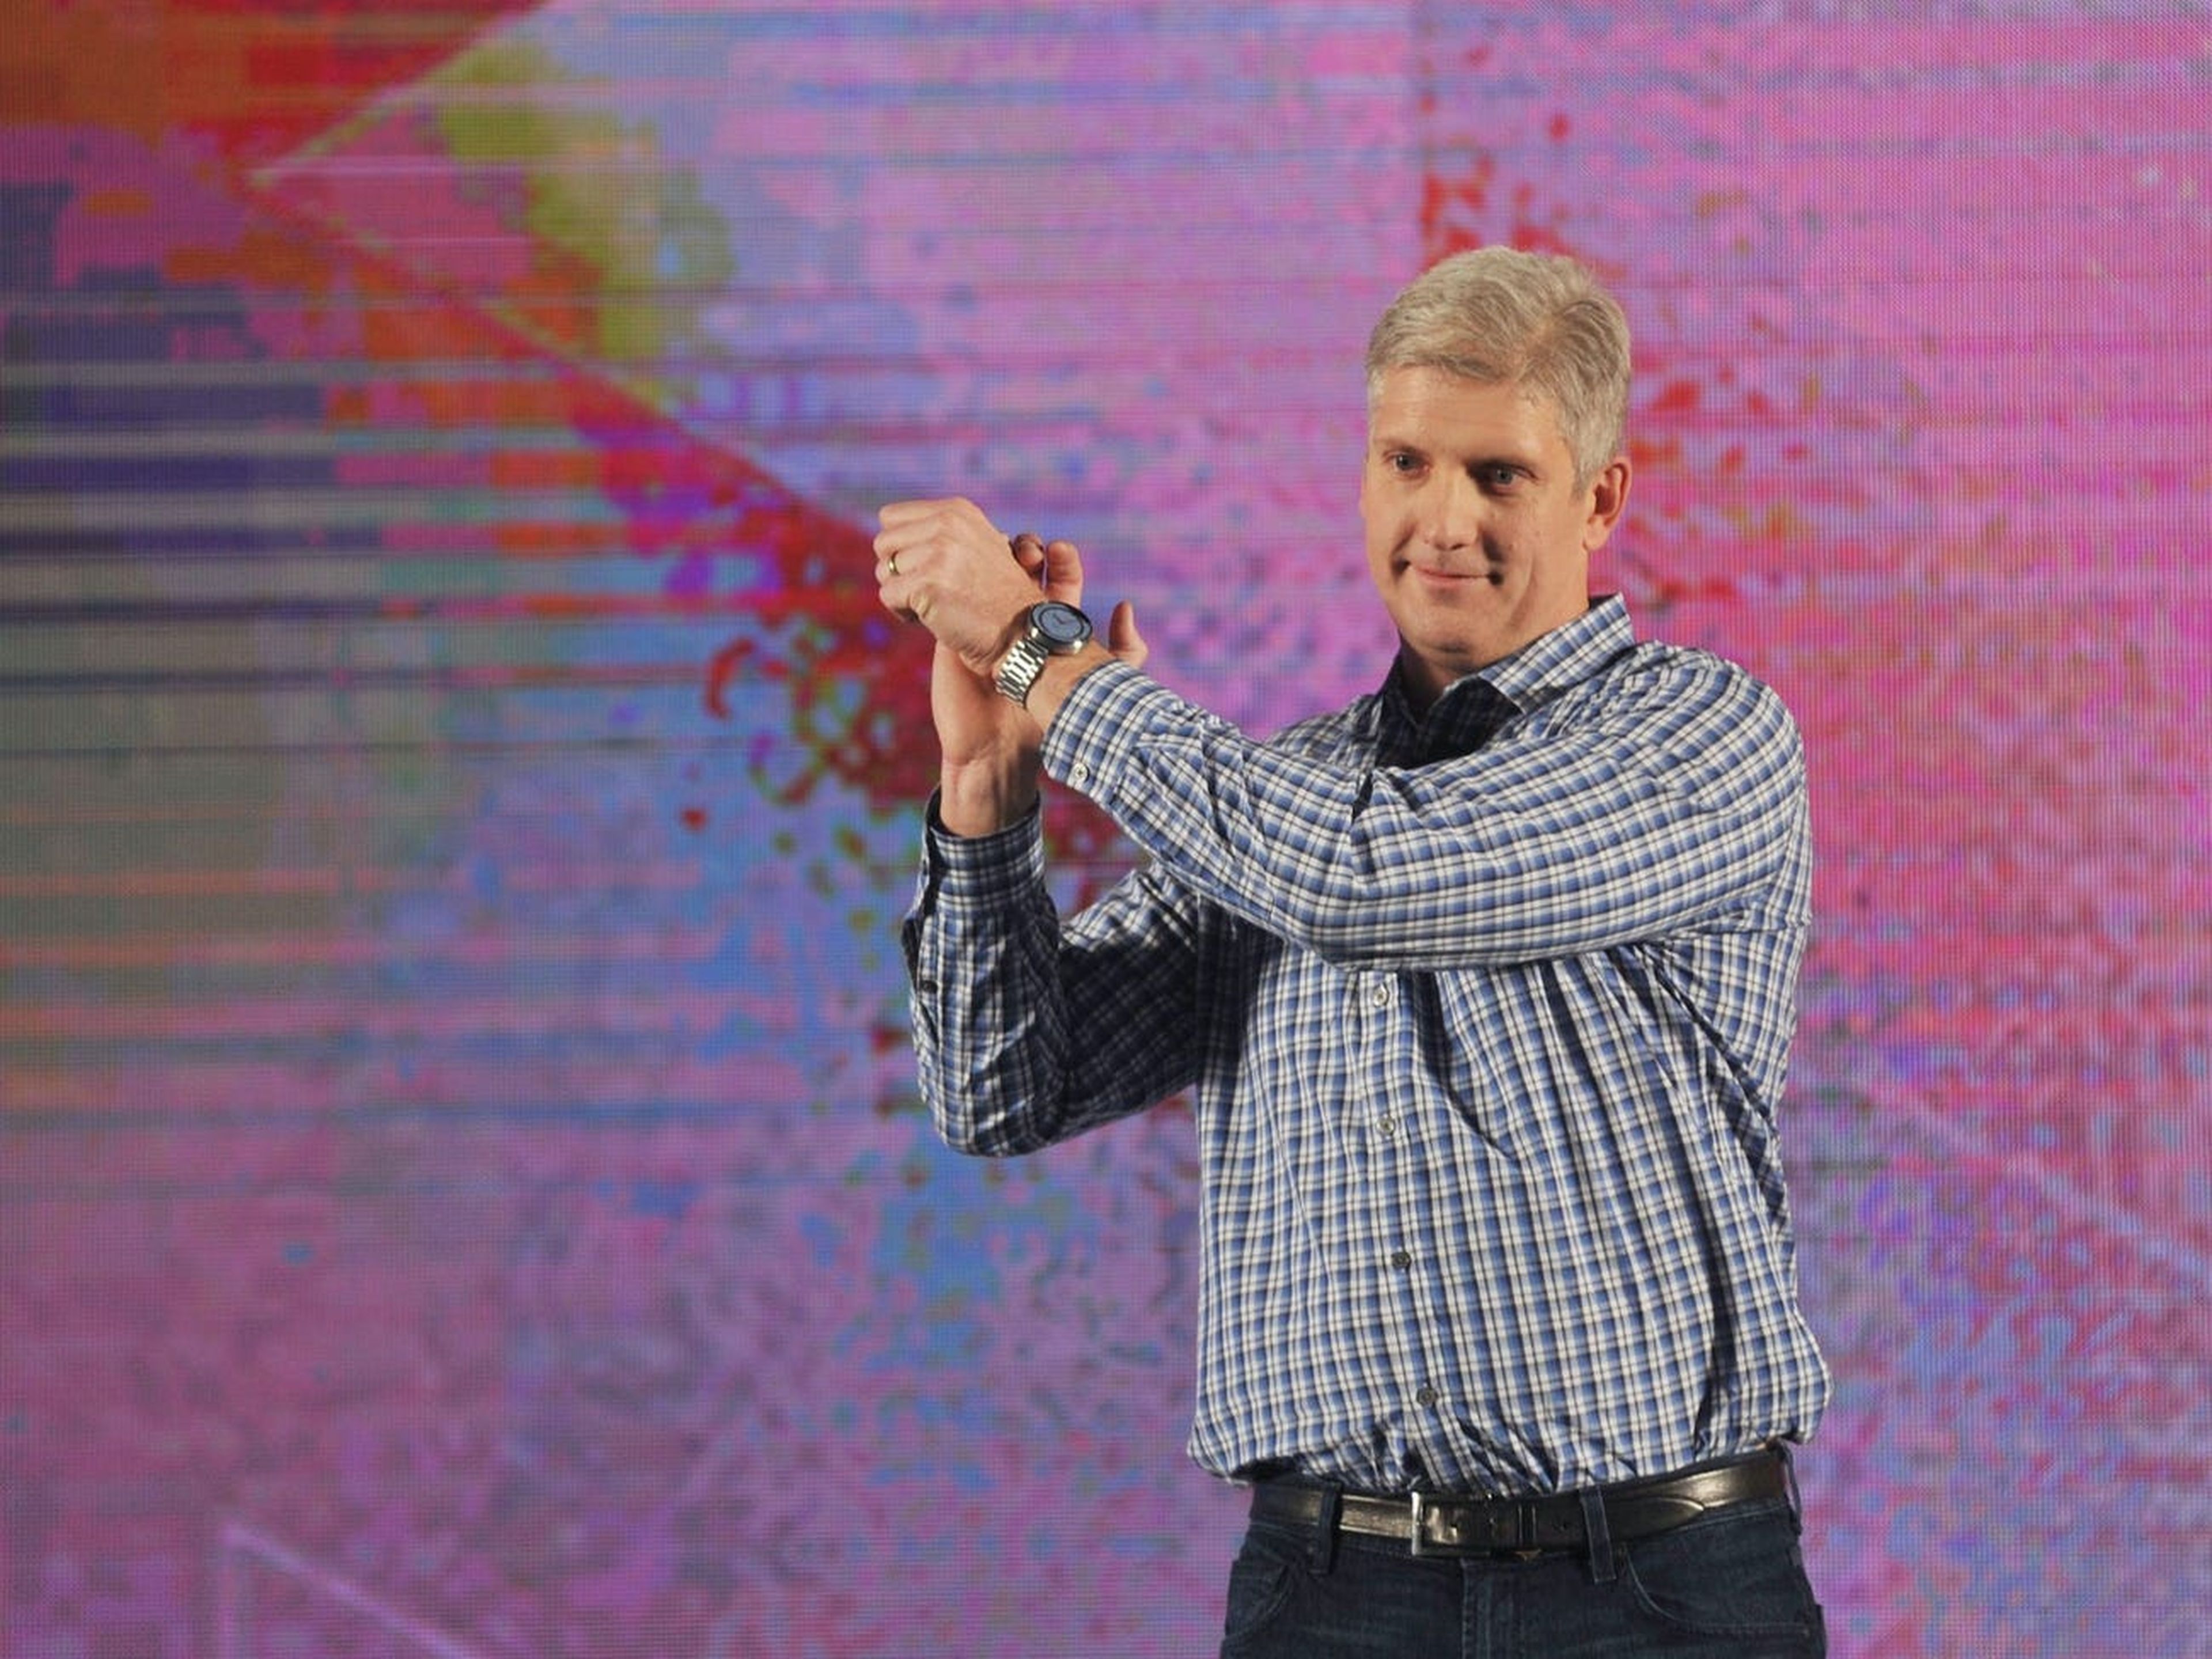 Rick Osterloh, Google's SVP of Devices and Services